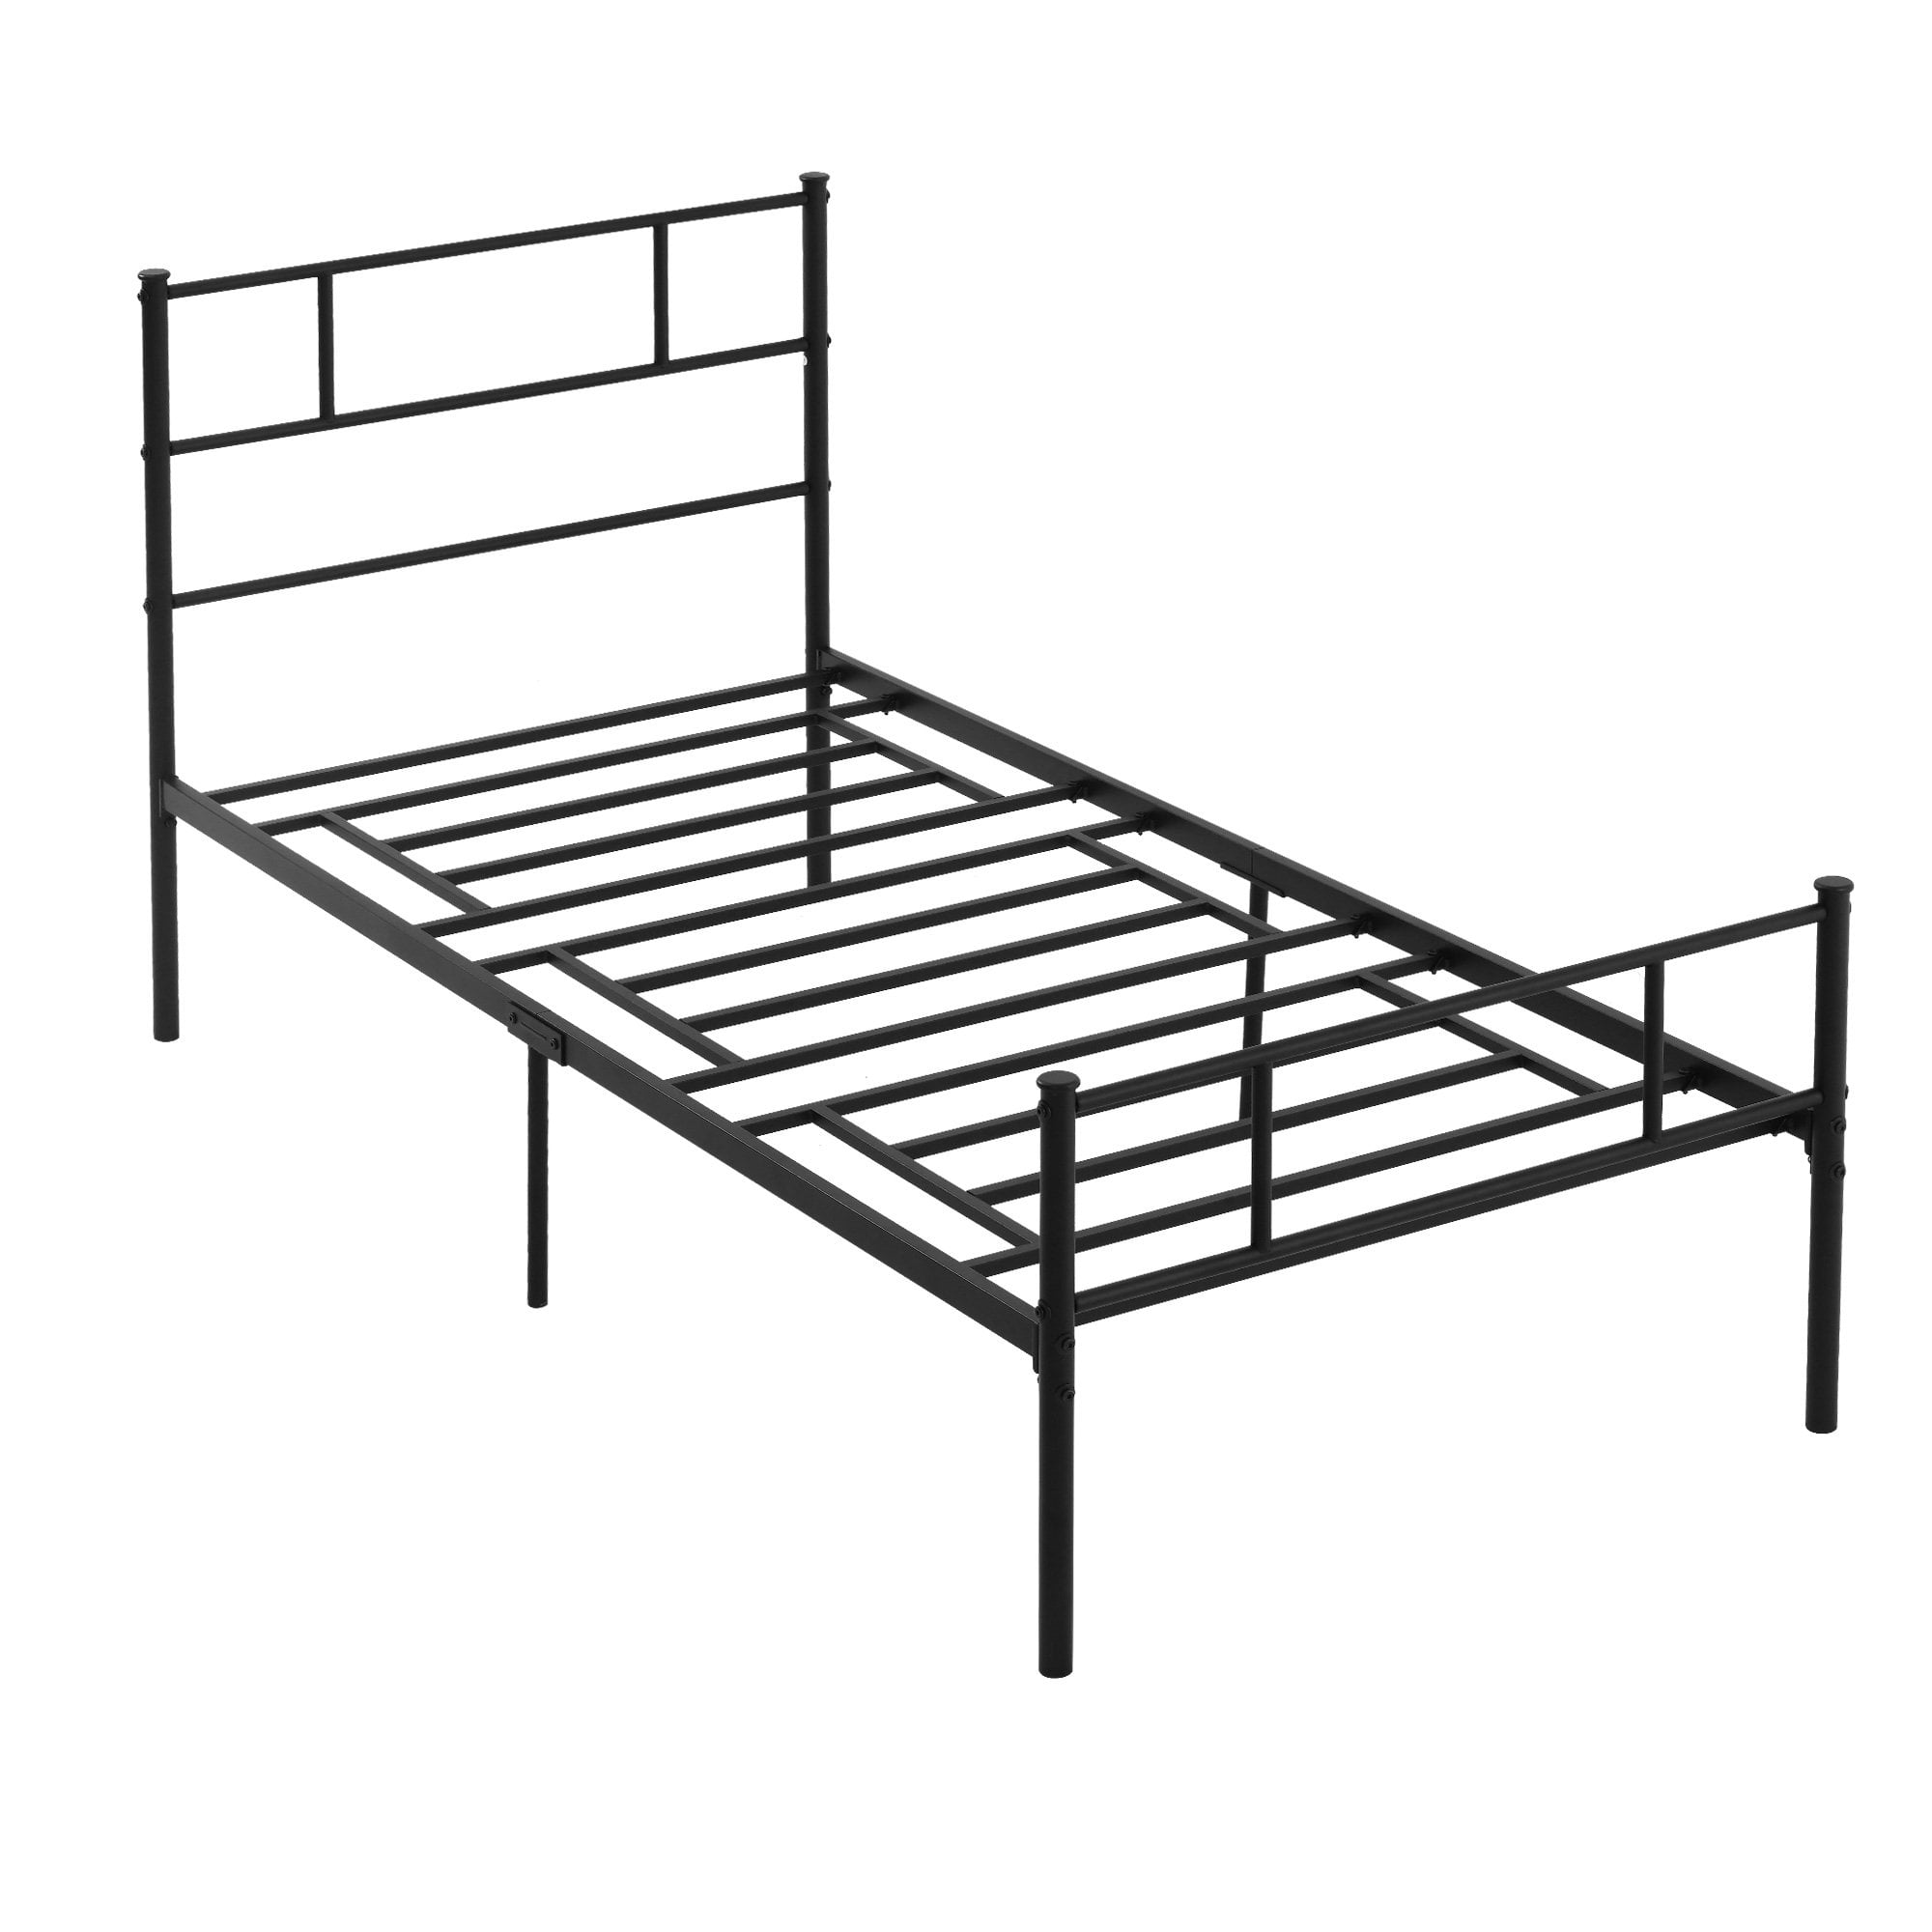 Single Metal Bed Frame Solid Bedstead Base with Headboard and Footboard - Metal Slat Support and Underbed Storage Space - Bedroom Furniture w/ Space -